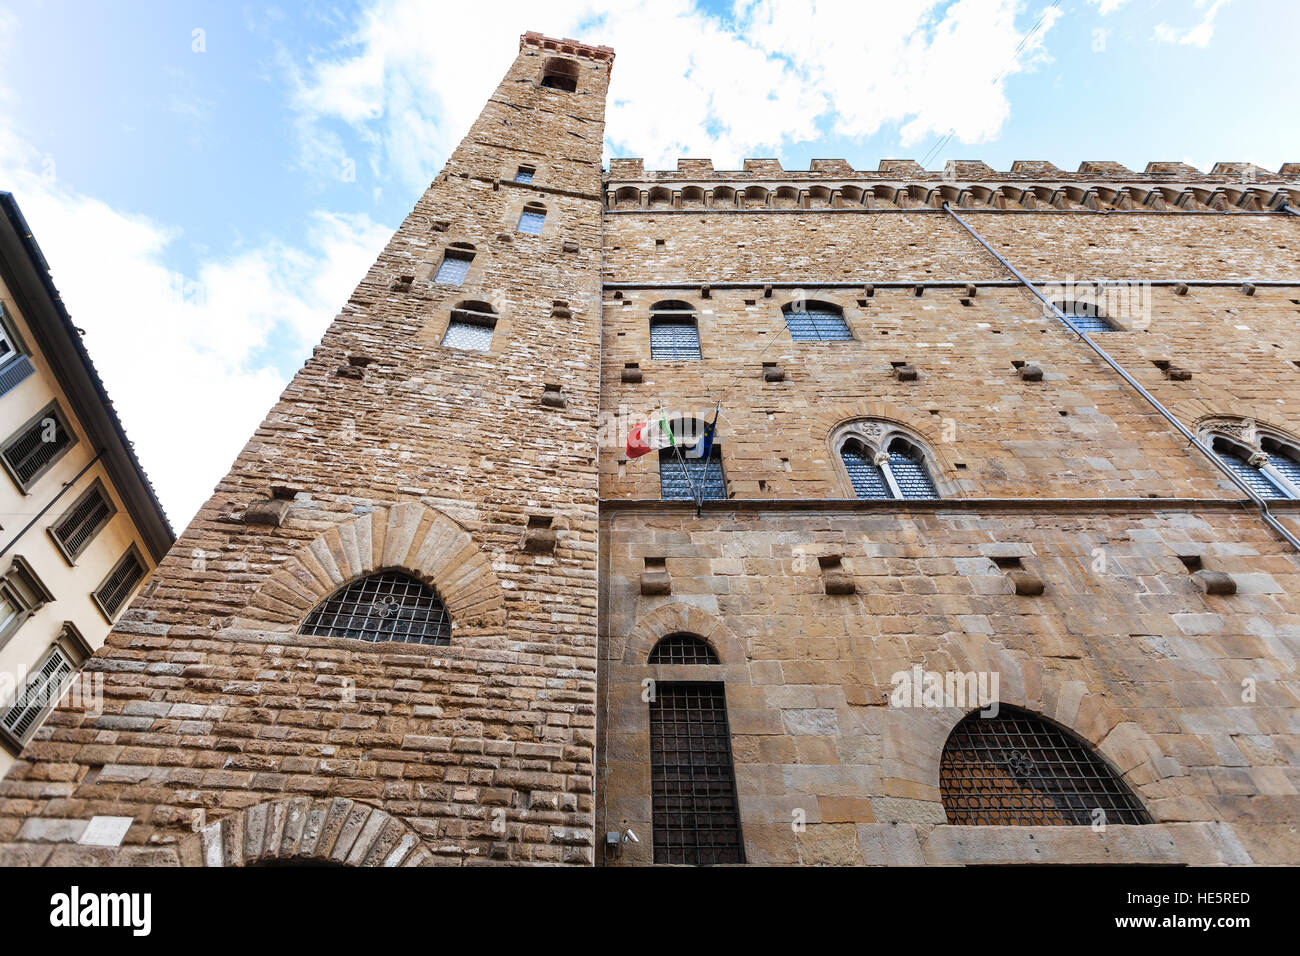 travel to Italy - wall of Bargello palace (Palazzo del Bargello, Palazzo del Popolo, Palace of the People) in Florence city Stock Photo